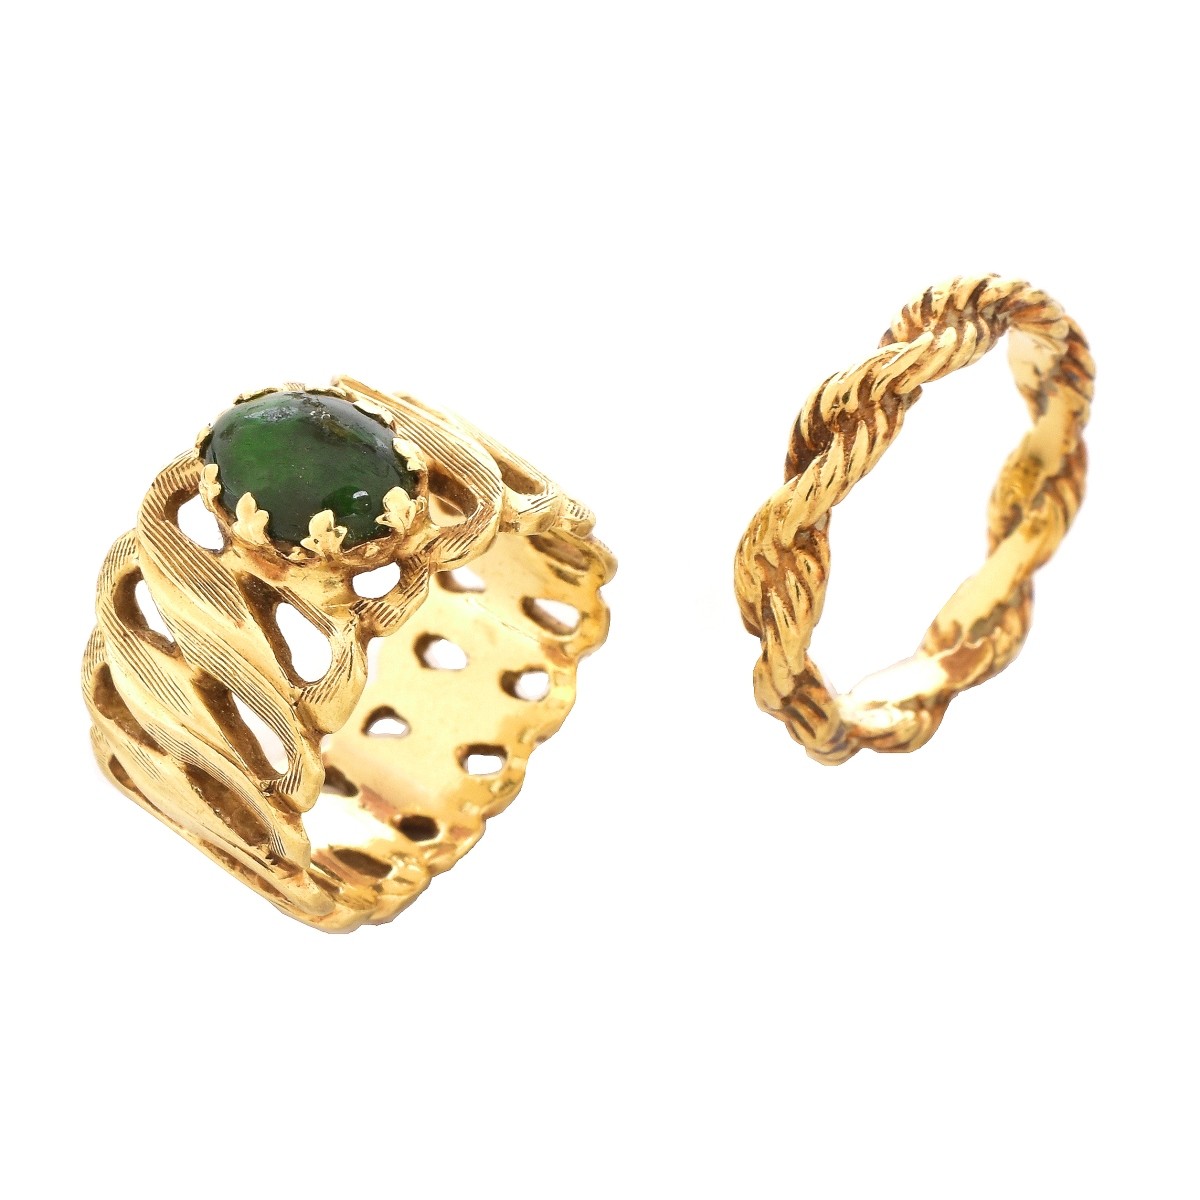 Two Vintage 14K Gold Rings